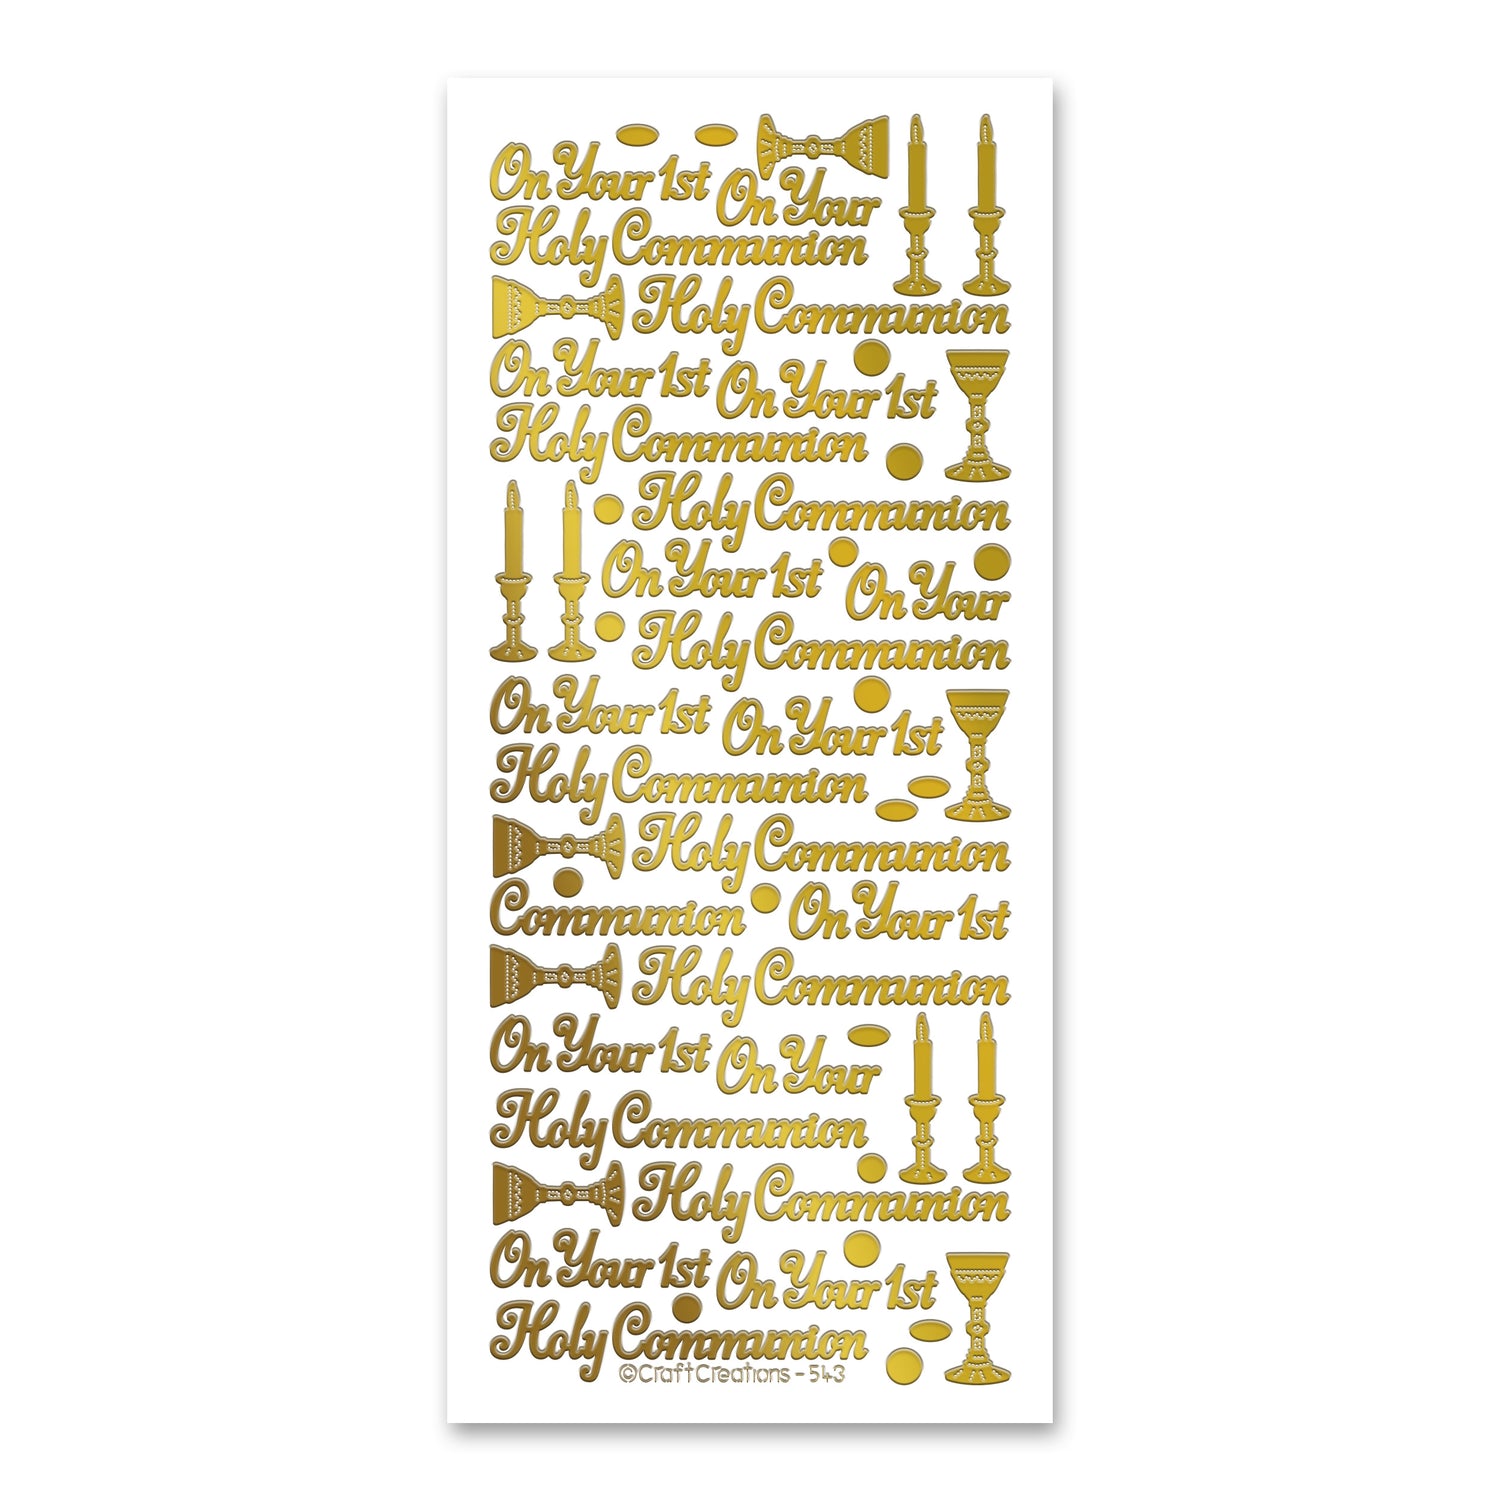 Holy Communion  Gold Self Adhesive Stickers